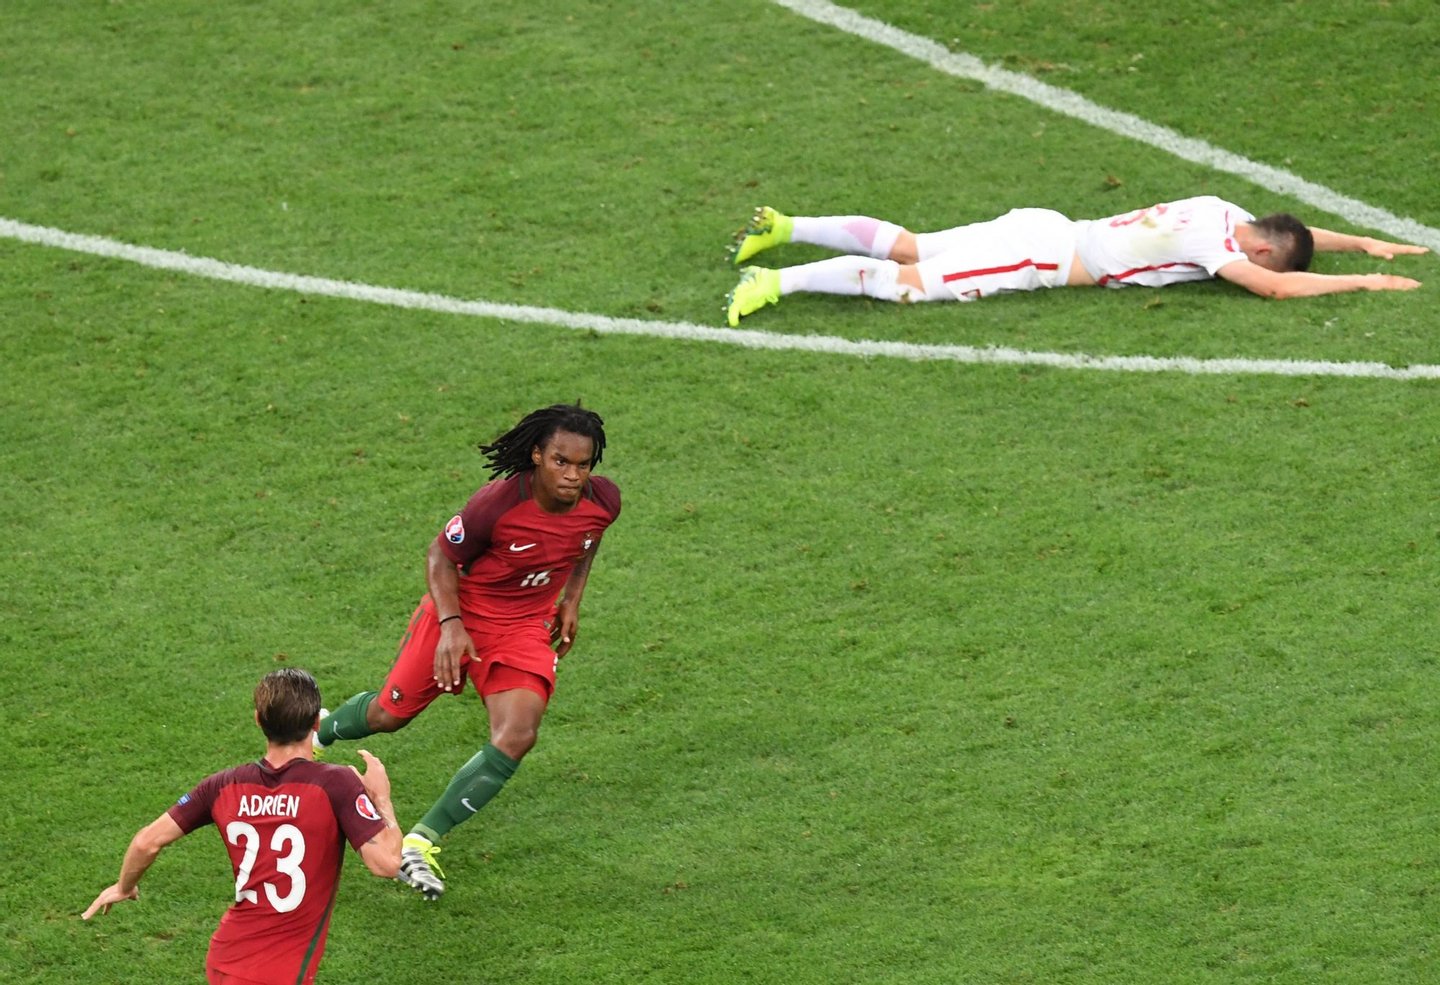 Portugal's midfielder Renato Sanches (C) celebrates next to Portugal's midfielder Adrien Silva after scoring during the Euro 2016 quarter-final football match between Poland and Portugal at the Stade Velodrome in Marseille on June 30, 2016. / AFP / BORIS HORVAT (Photo credit should read BORIS HORVAT/AFP/Getty Images)